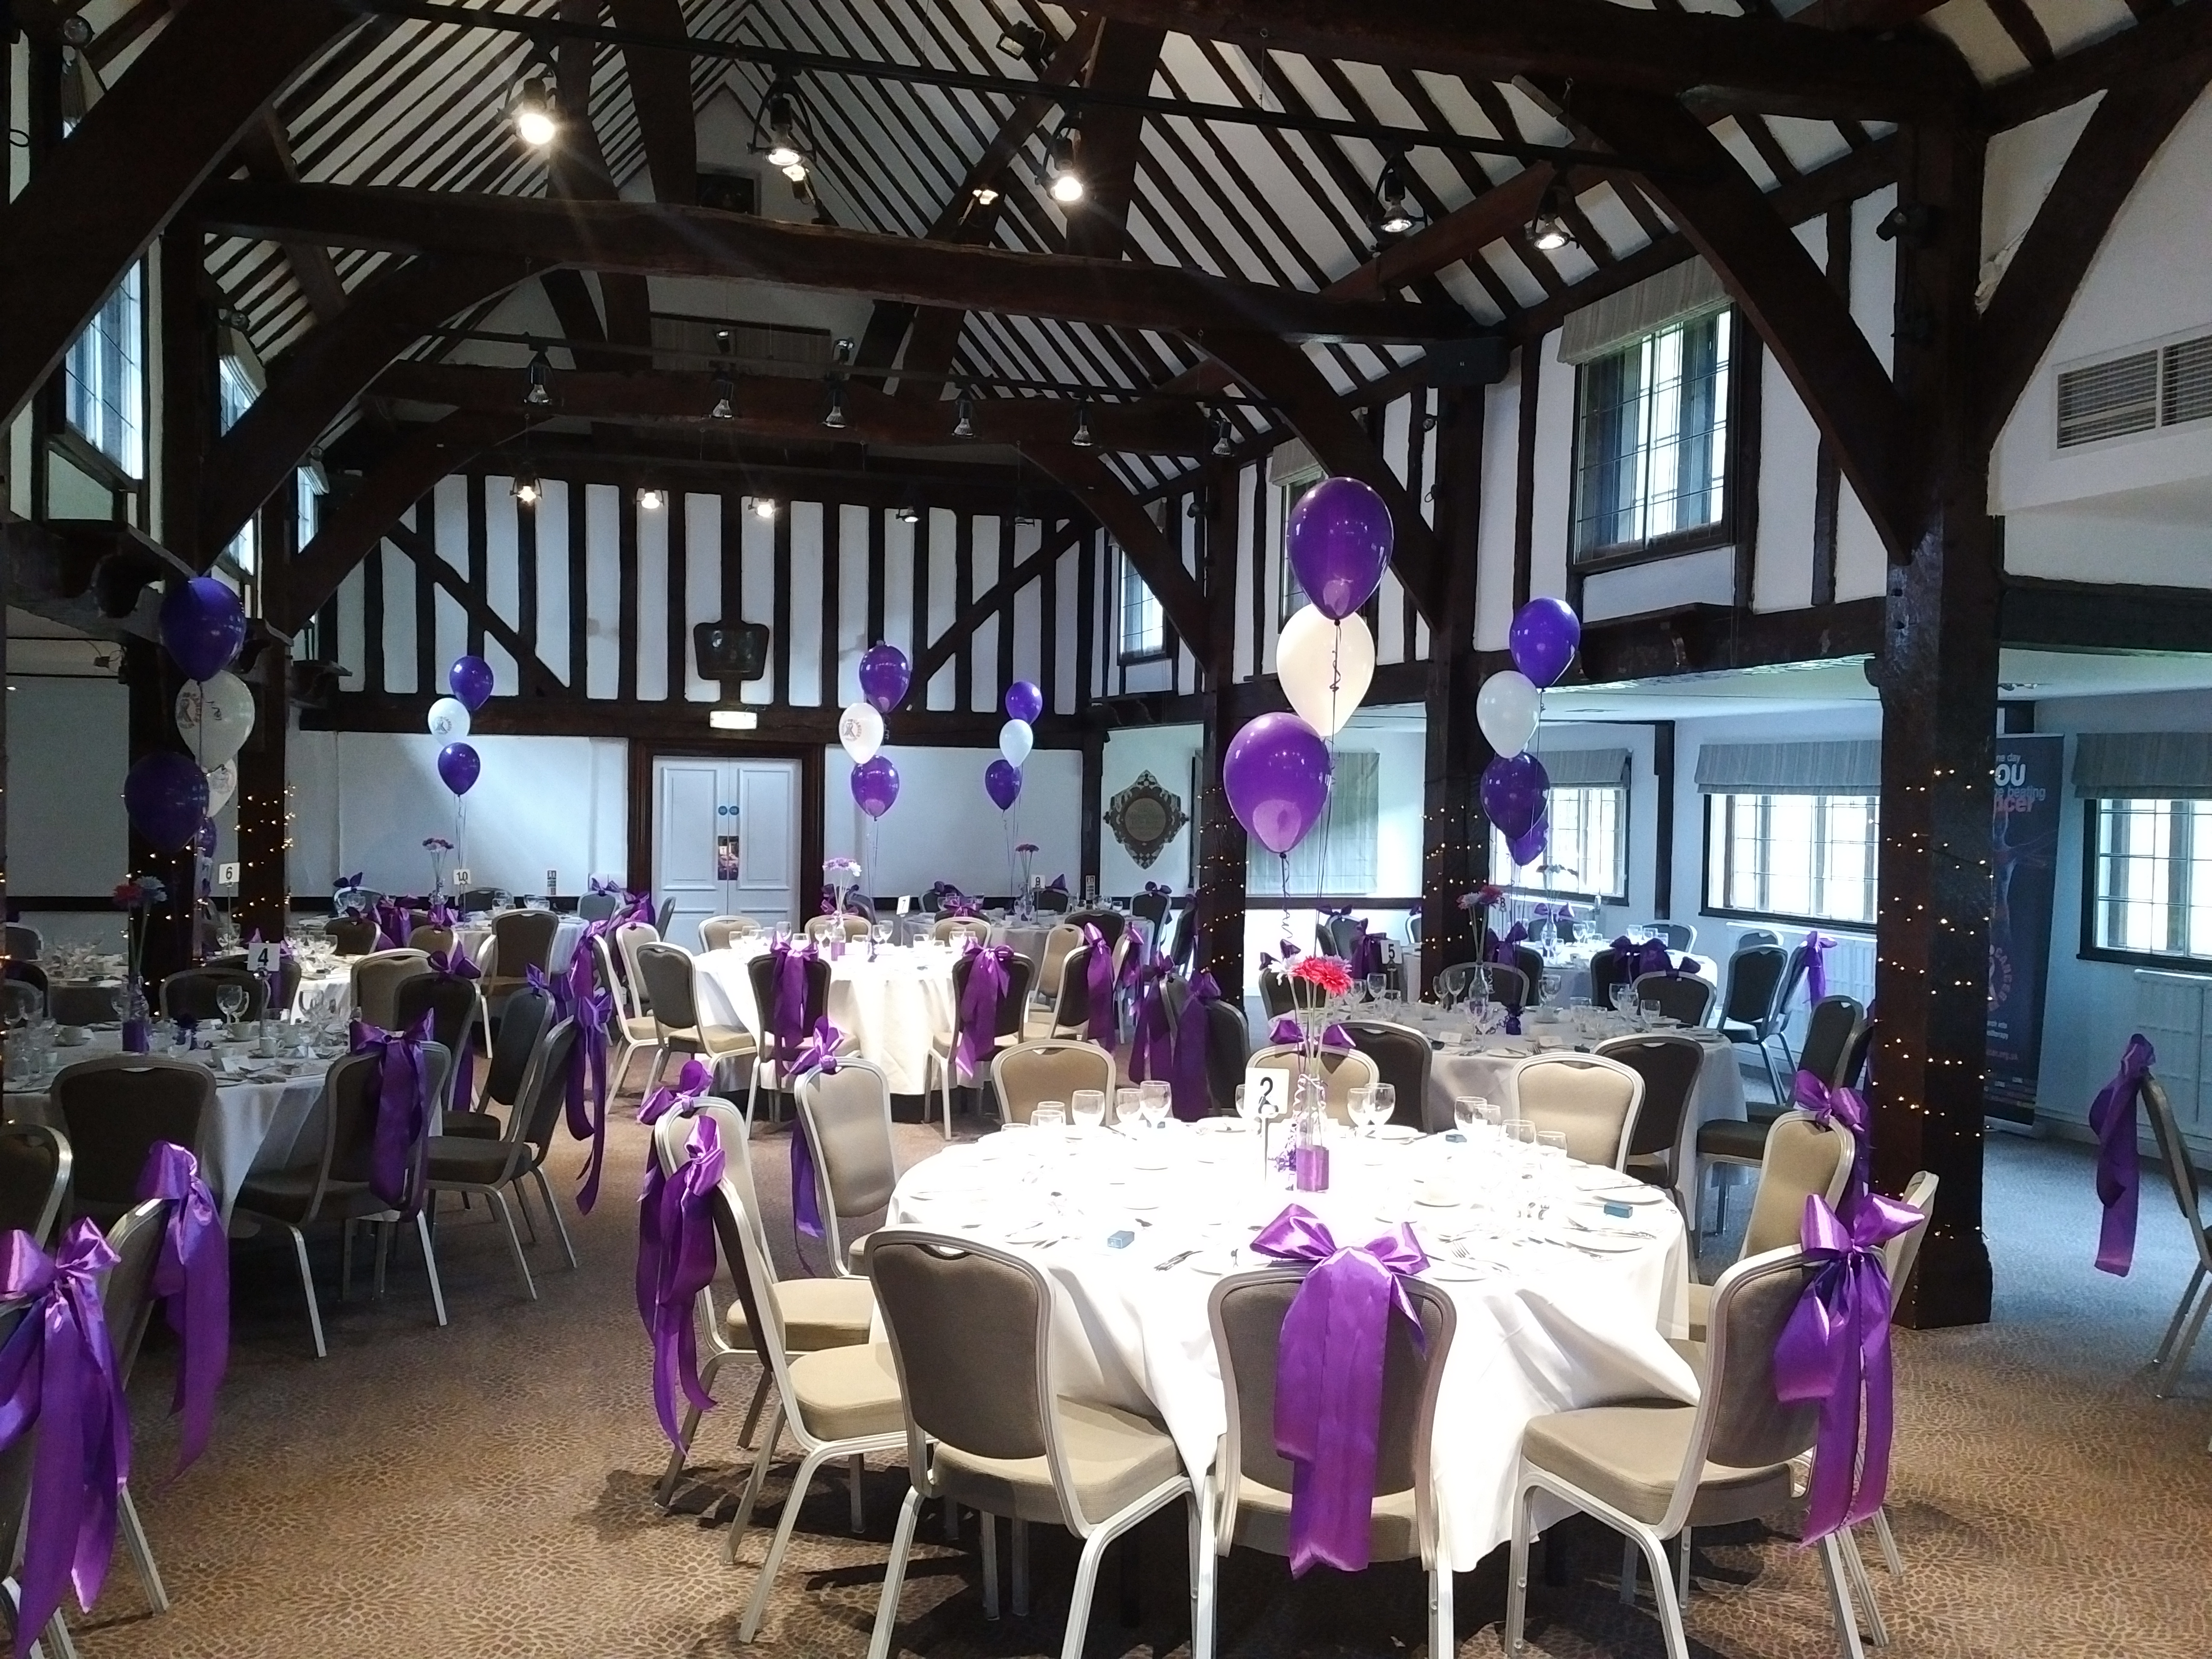 Table Bouquets of Latex Balloons for a Prom at the Tithe Barn, Dorking